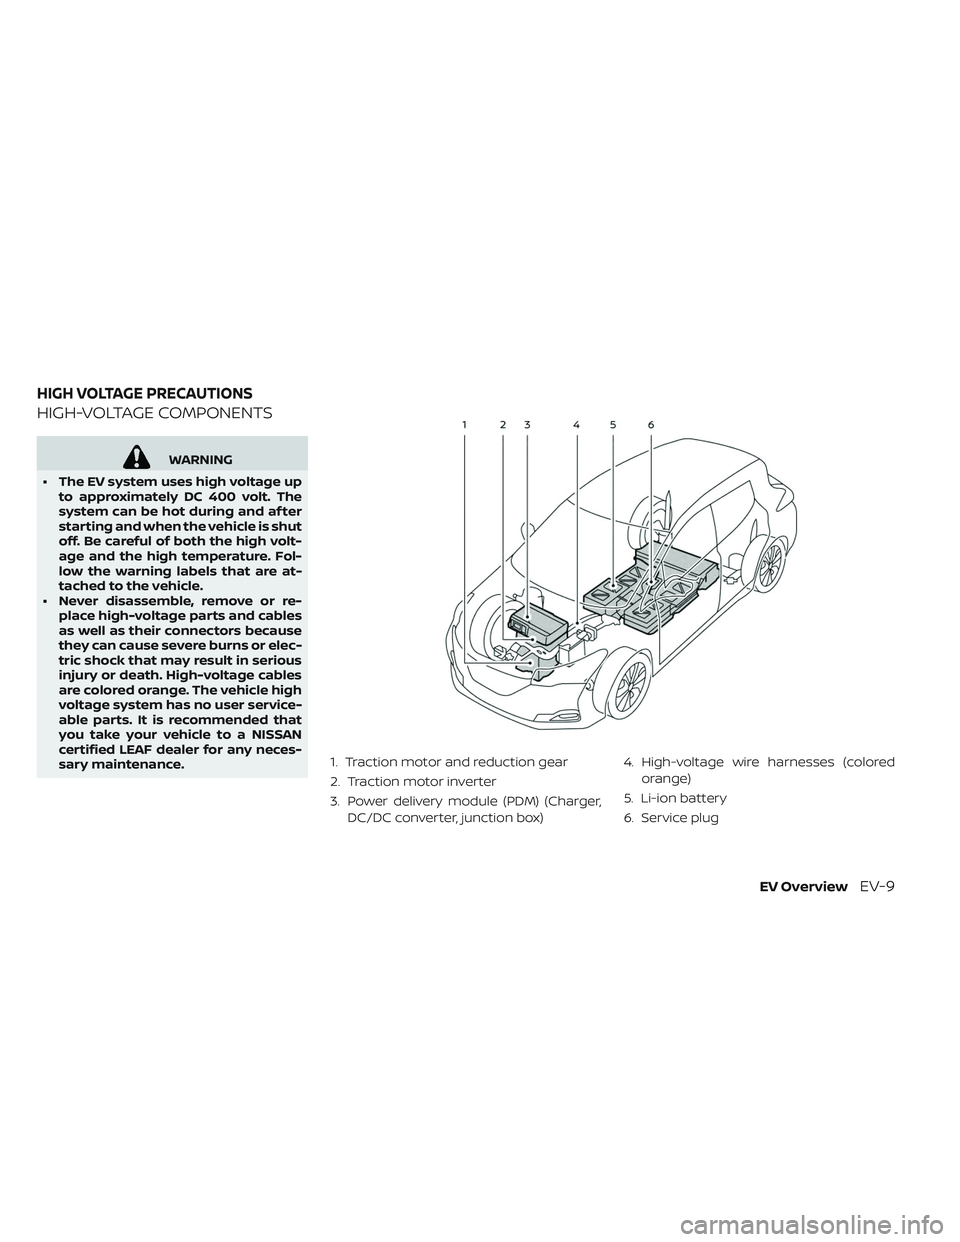 NISSAN LEAF 2019  Owner´s Manual HIGH-VOLTAGE COMPONENTS
WARNING
• The EV system uses high voltage up to approximately DC 400 volt. The
system can be hot during and af ter
starting and when the vehicle is shut
off. Be careful of bo